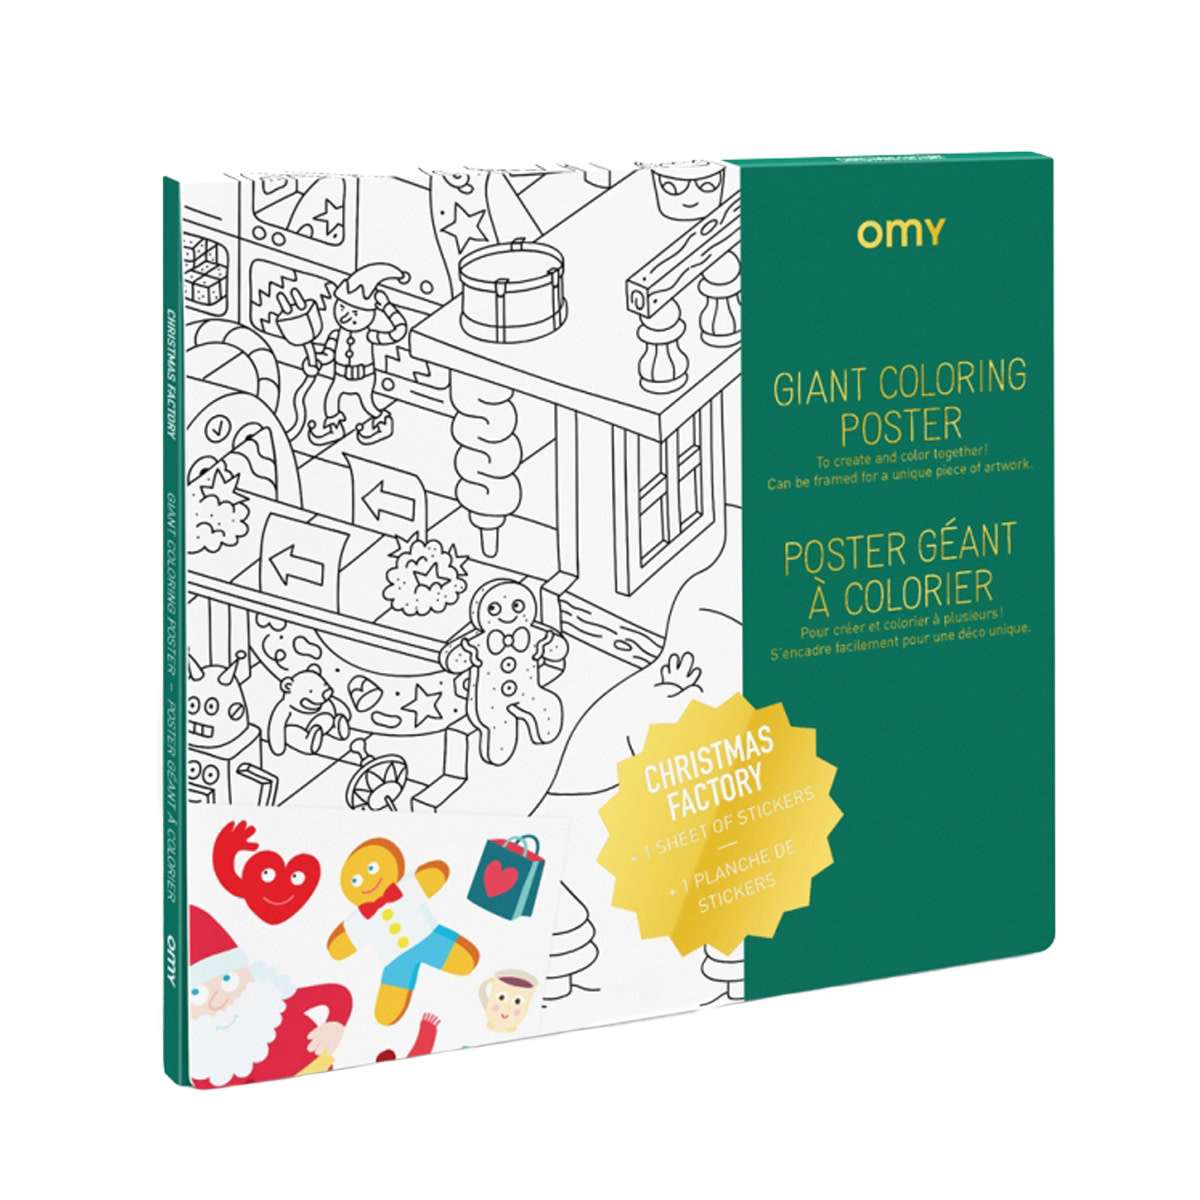 OMY Poster Géant et Stickers Home - Omy